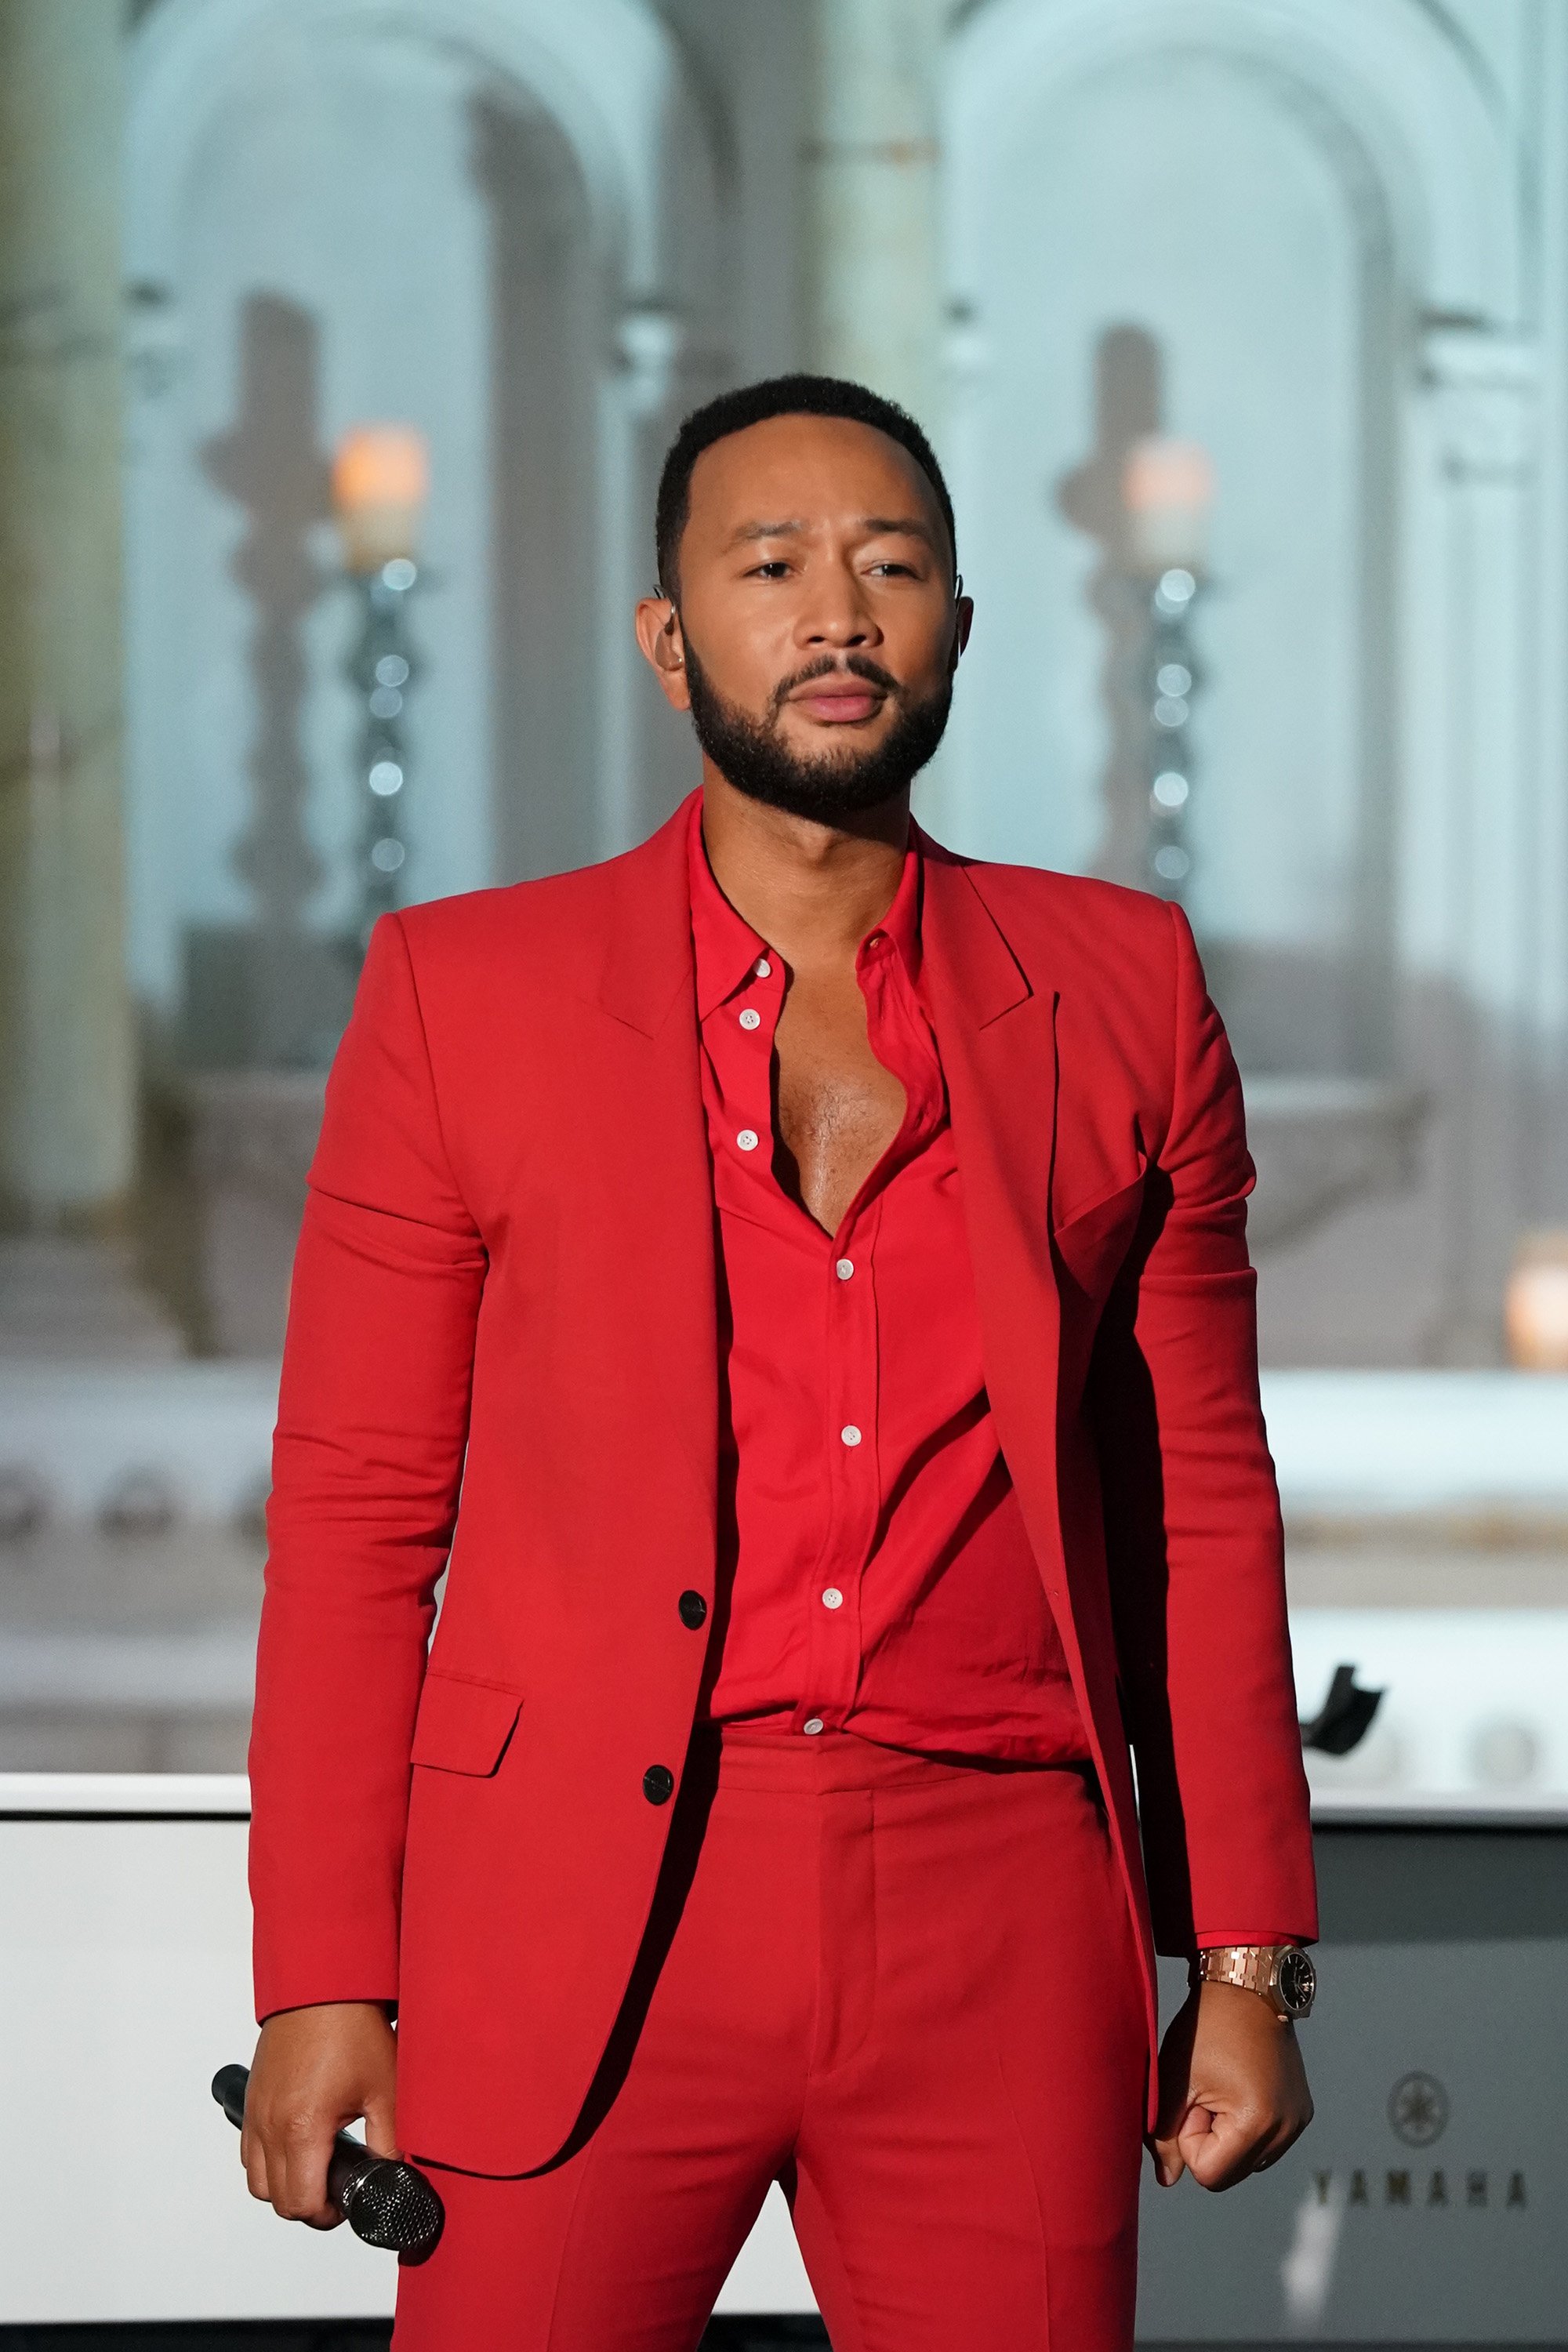 John Legend performs at Macy’s “Fourth of July Fireworks Spectacular" on July 4, 2020. | Source: Getty Images